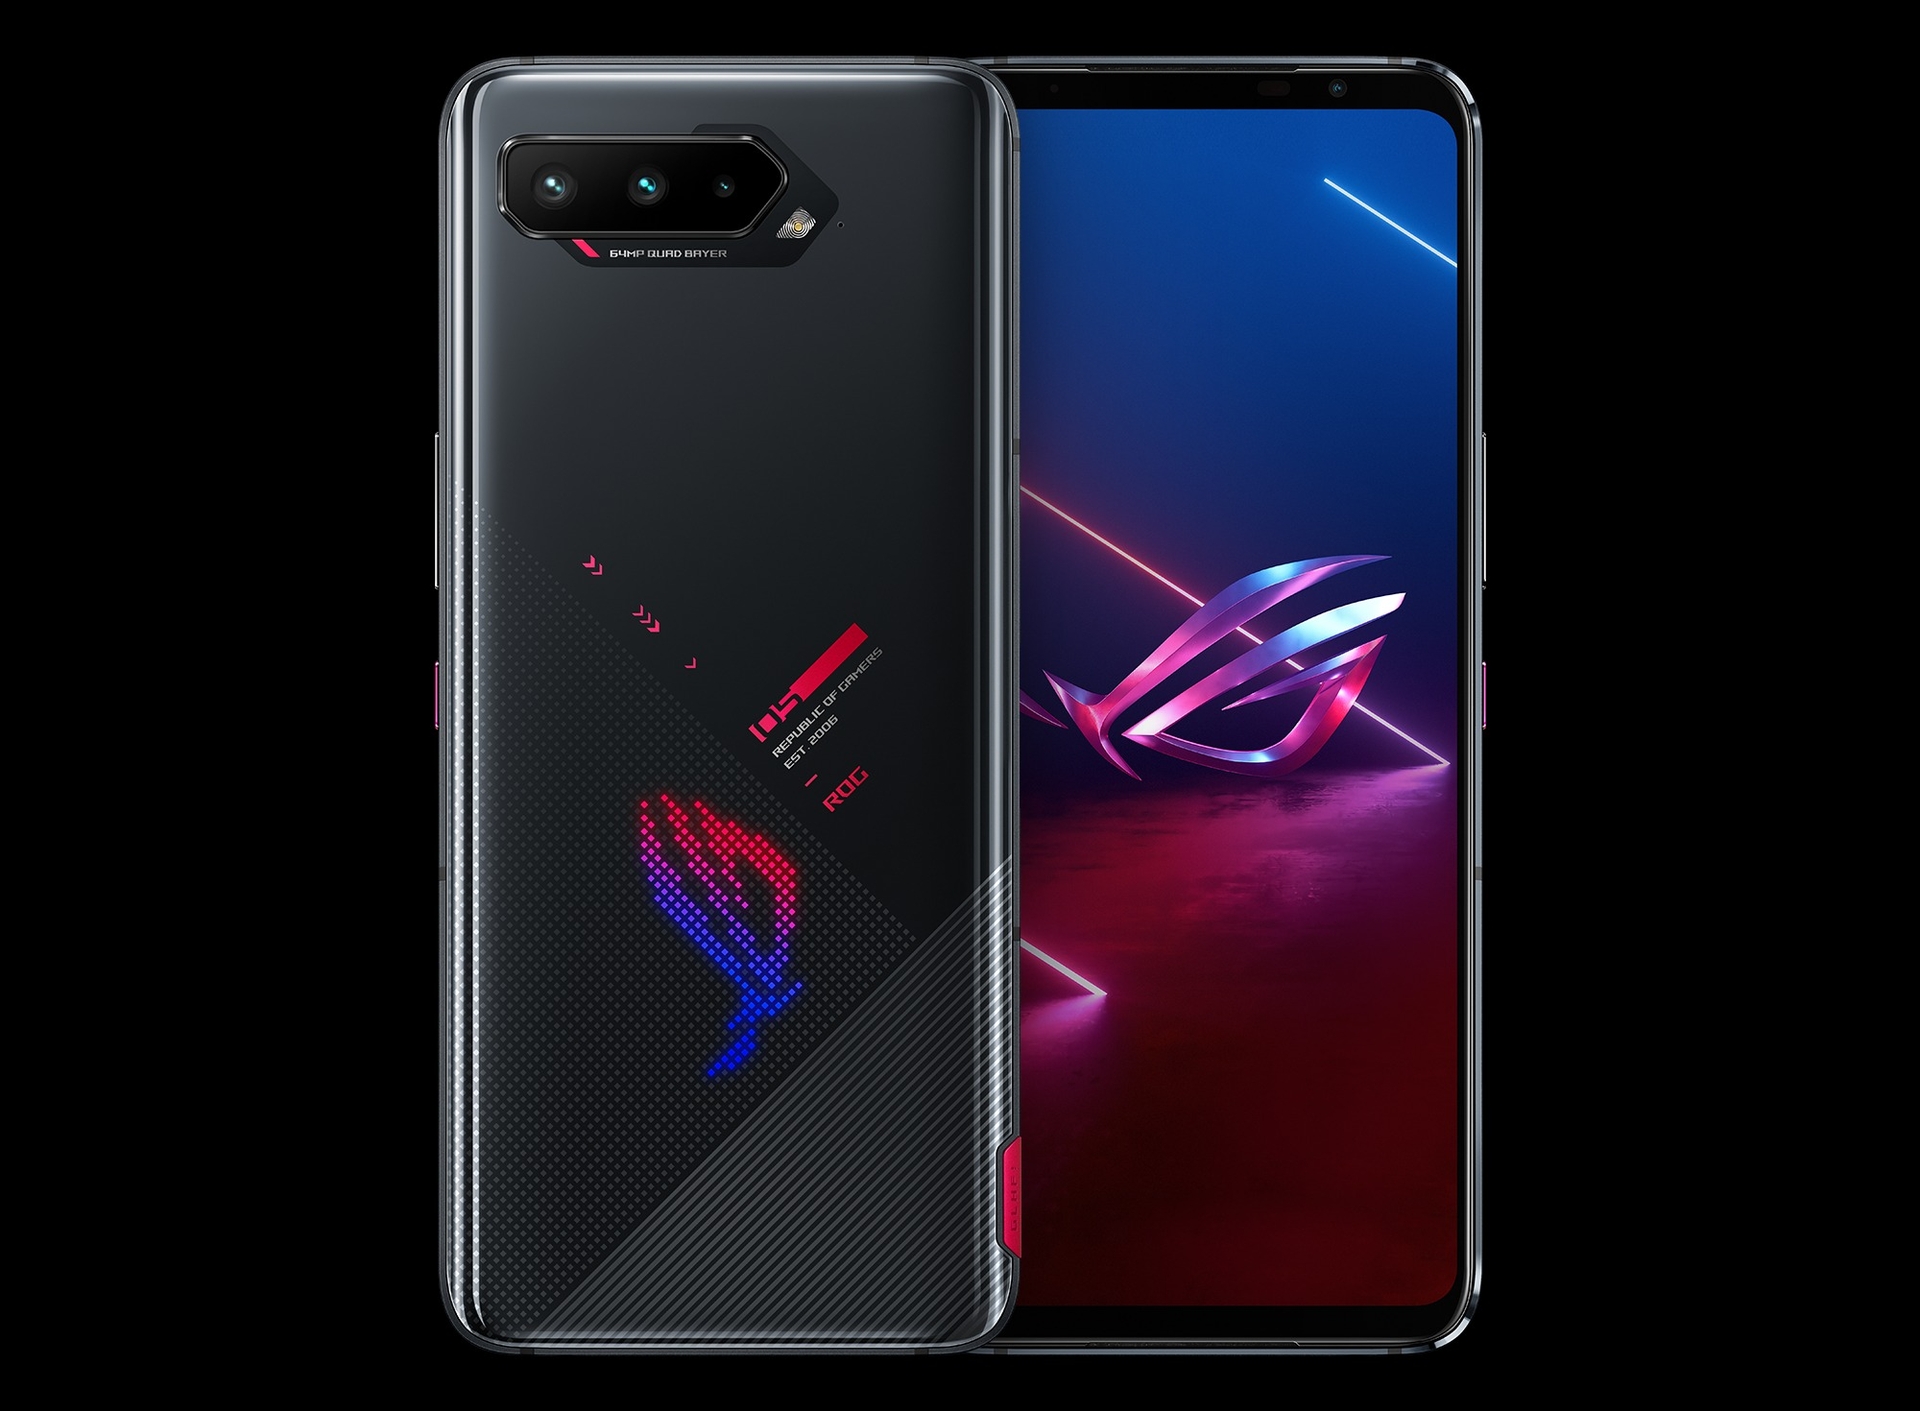 In this article, we are going to give you our ASUS ROG Phone 5S review, including the design features, specifications, performance, and more.